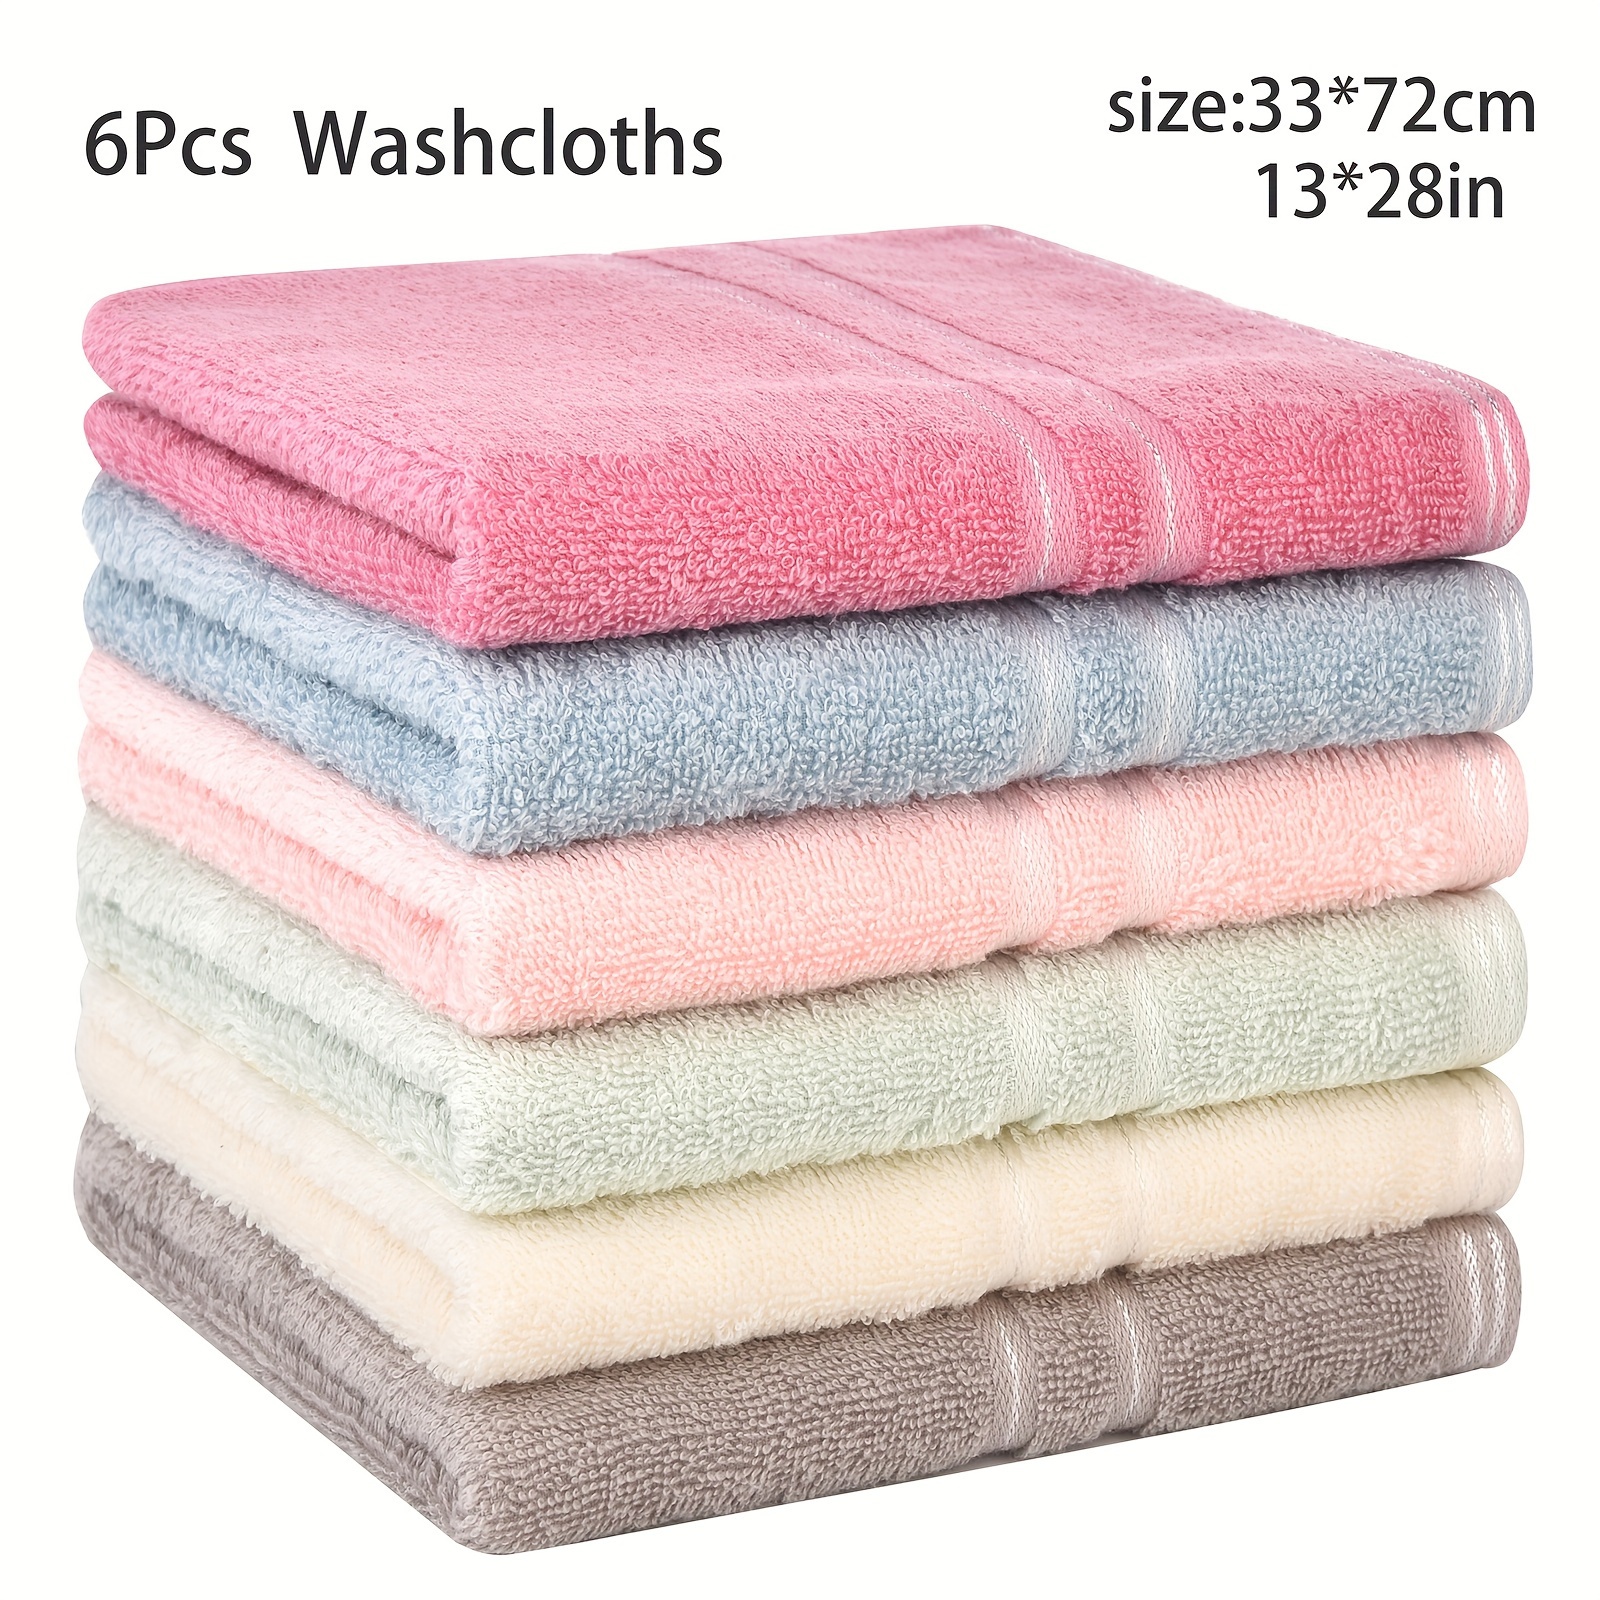 

6 Pack, Pure Cotton Face Towels, Lightweight And Super Absorbent, Assorted Colors For Daily Refreshment, 13 Inches X 28 Inches, Bathroom Essentials